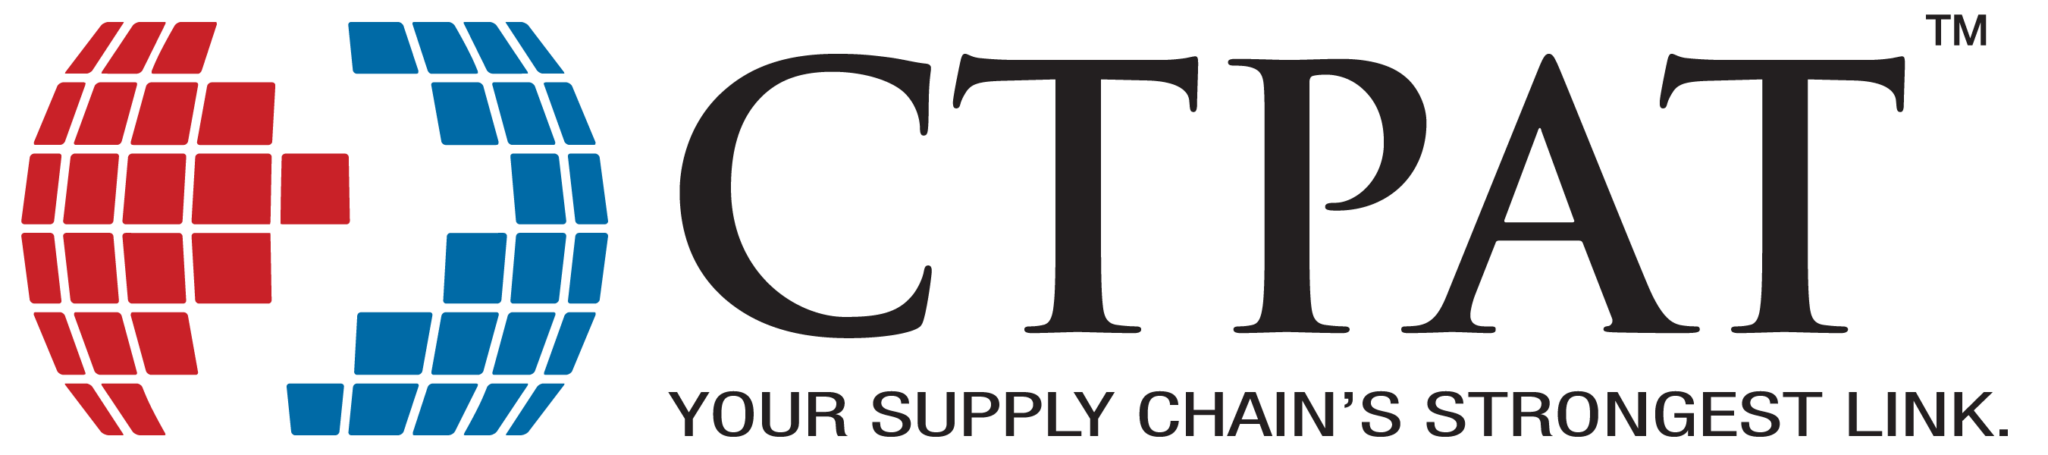 FORCED LABOR BENEFITS ADDED TO CTPAT TRADE COMPLIANCE PROGRAM